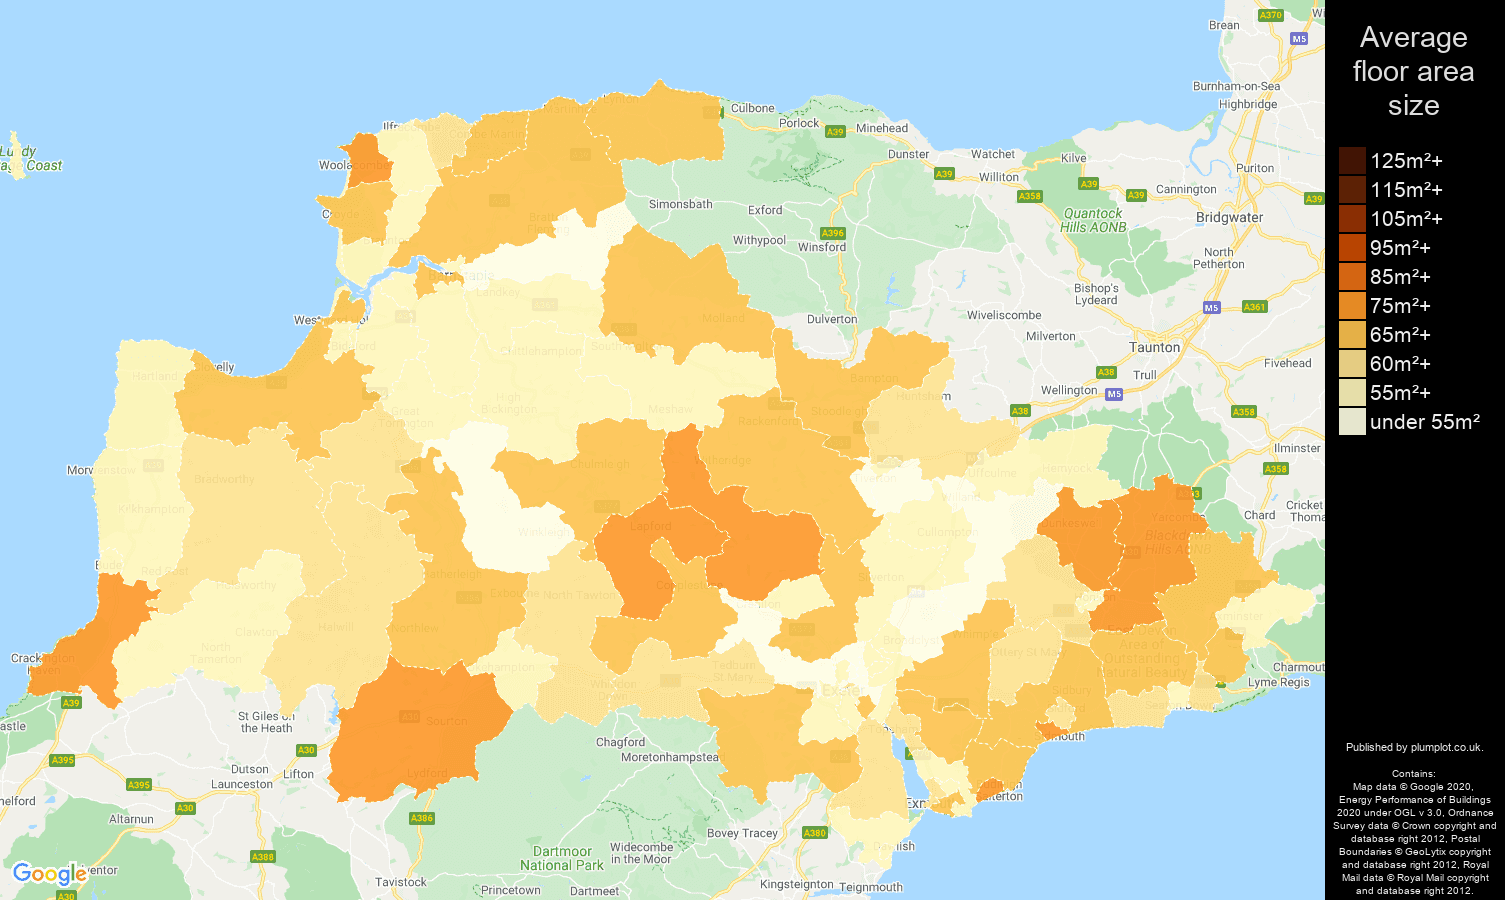 Exeter map of average floor area size of flats